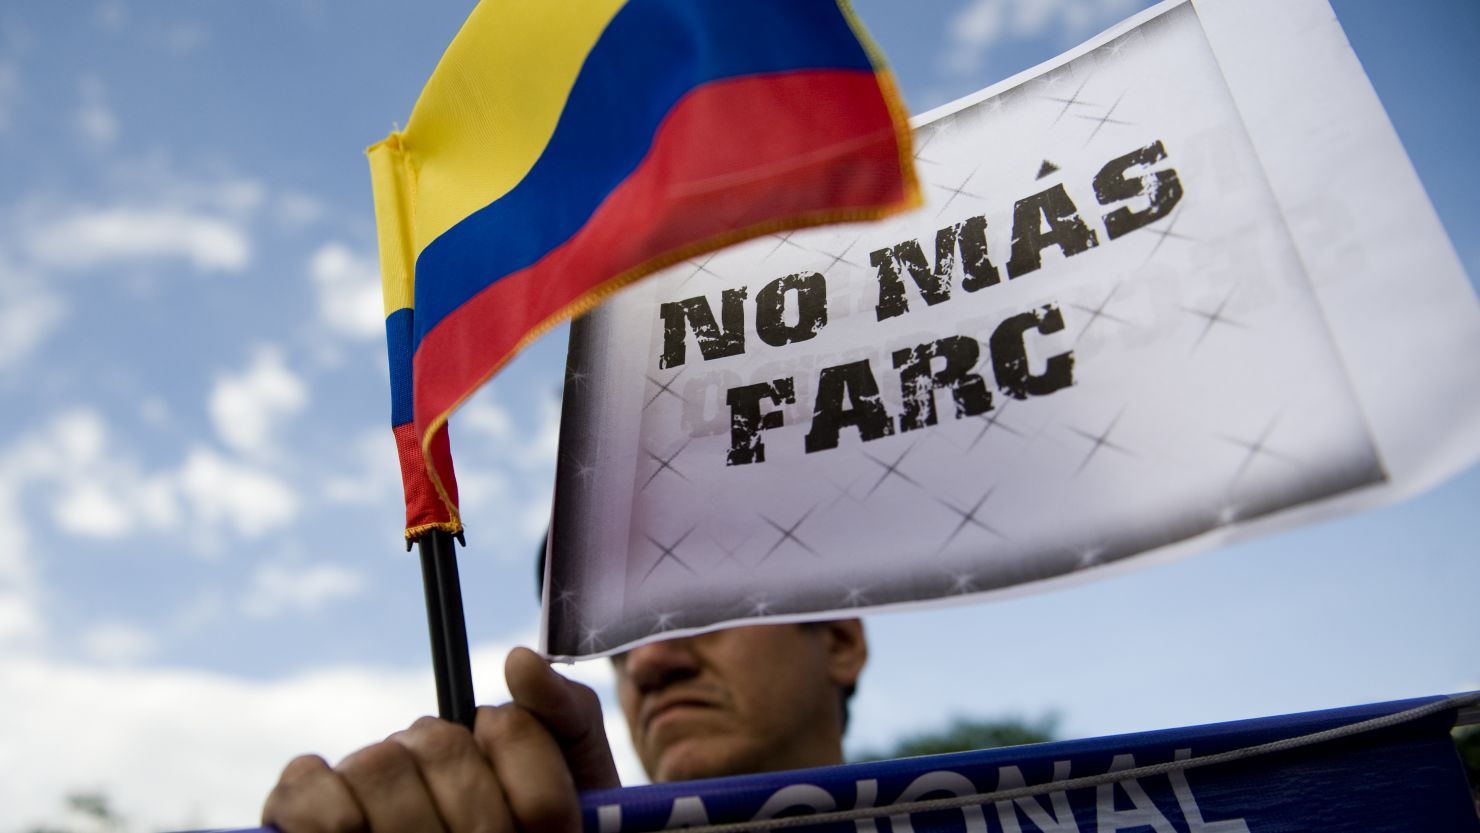 A man holds a Colombian flag with a sign that reads "No more FARC" on Wednesday, November 23, in Cali, Colombia.